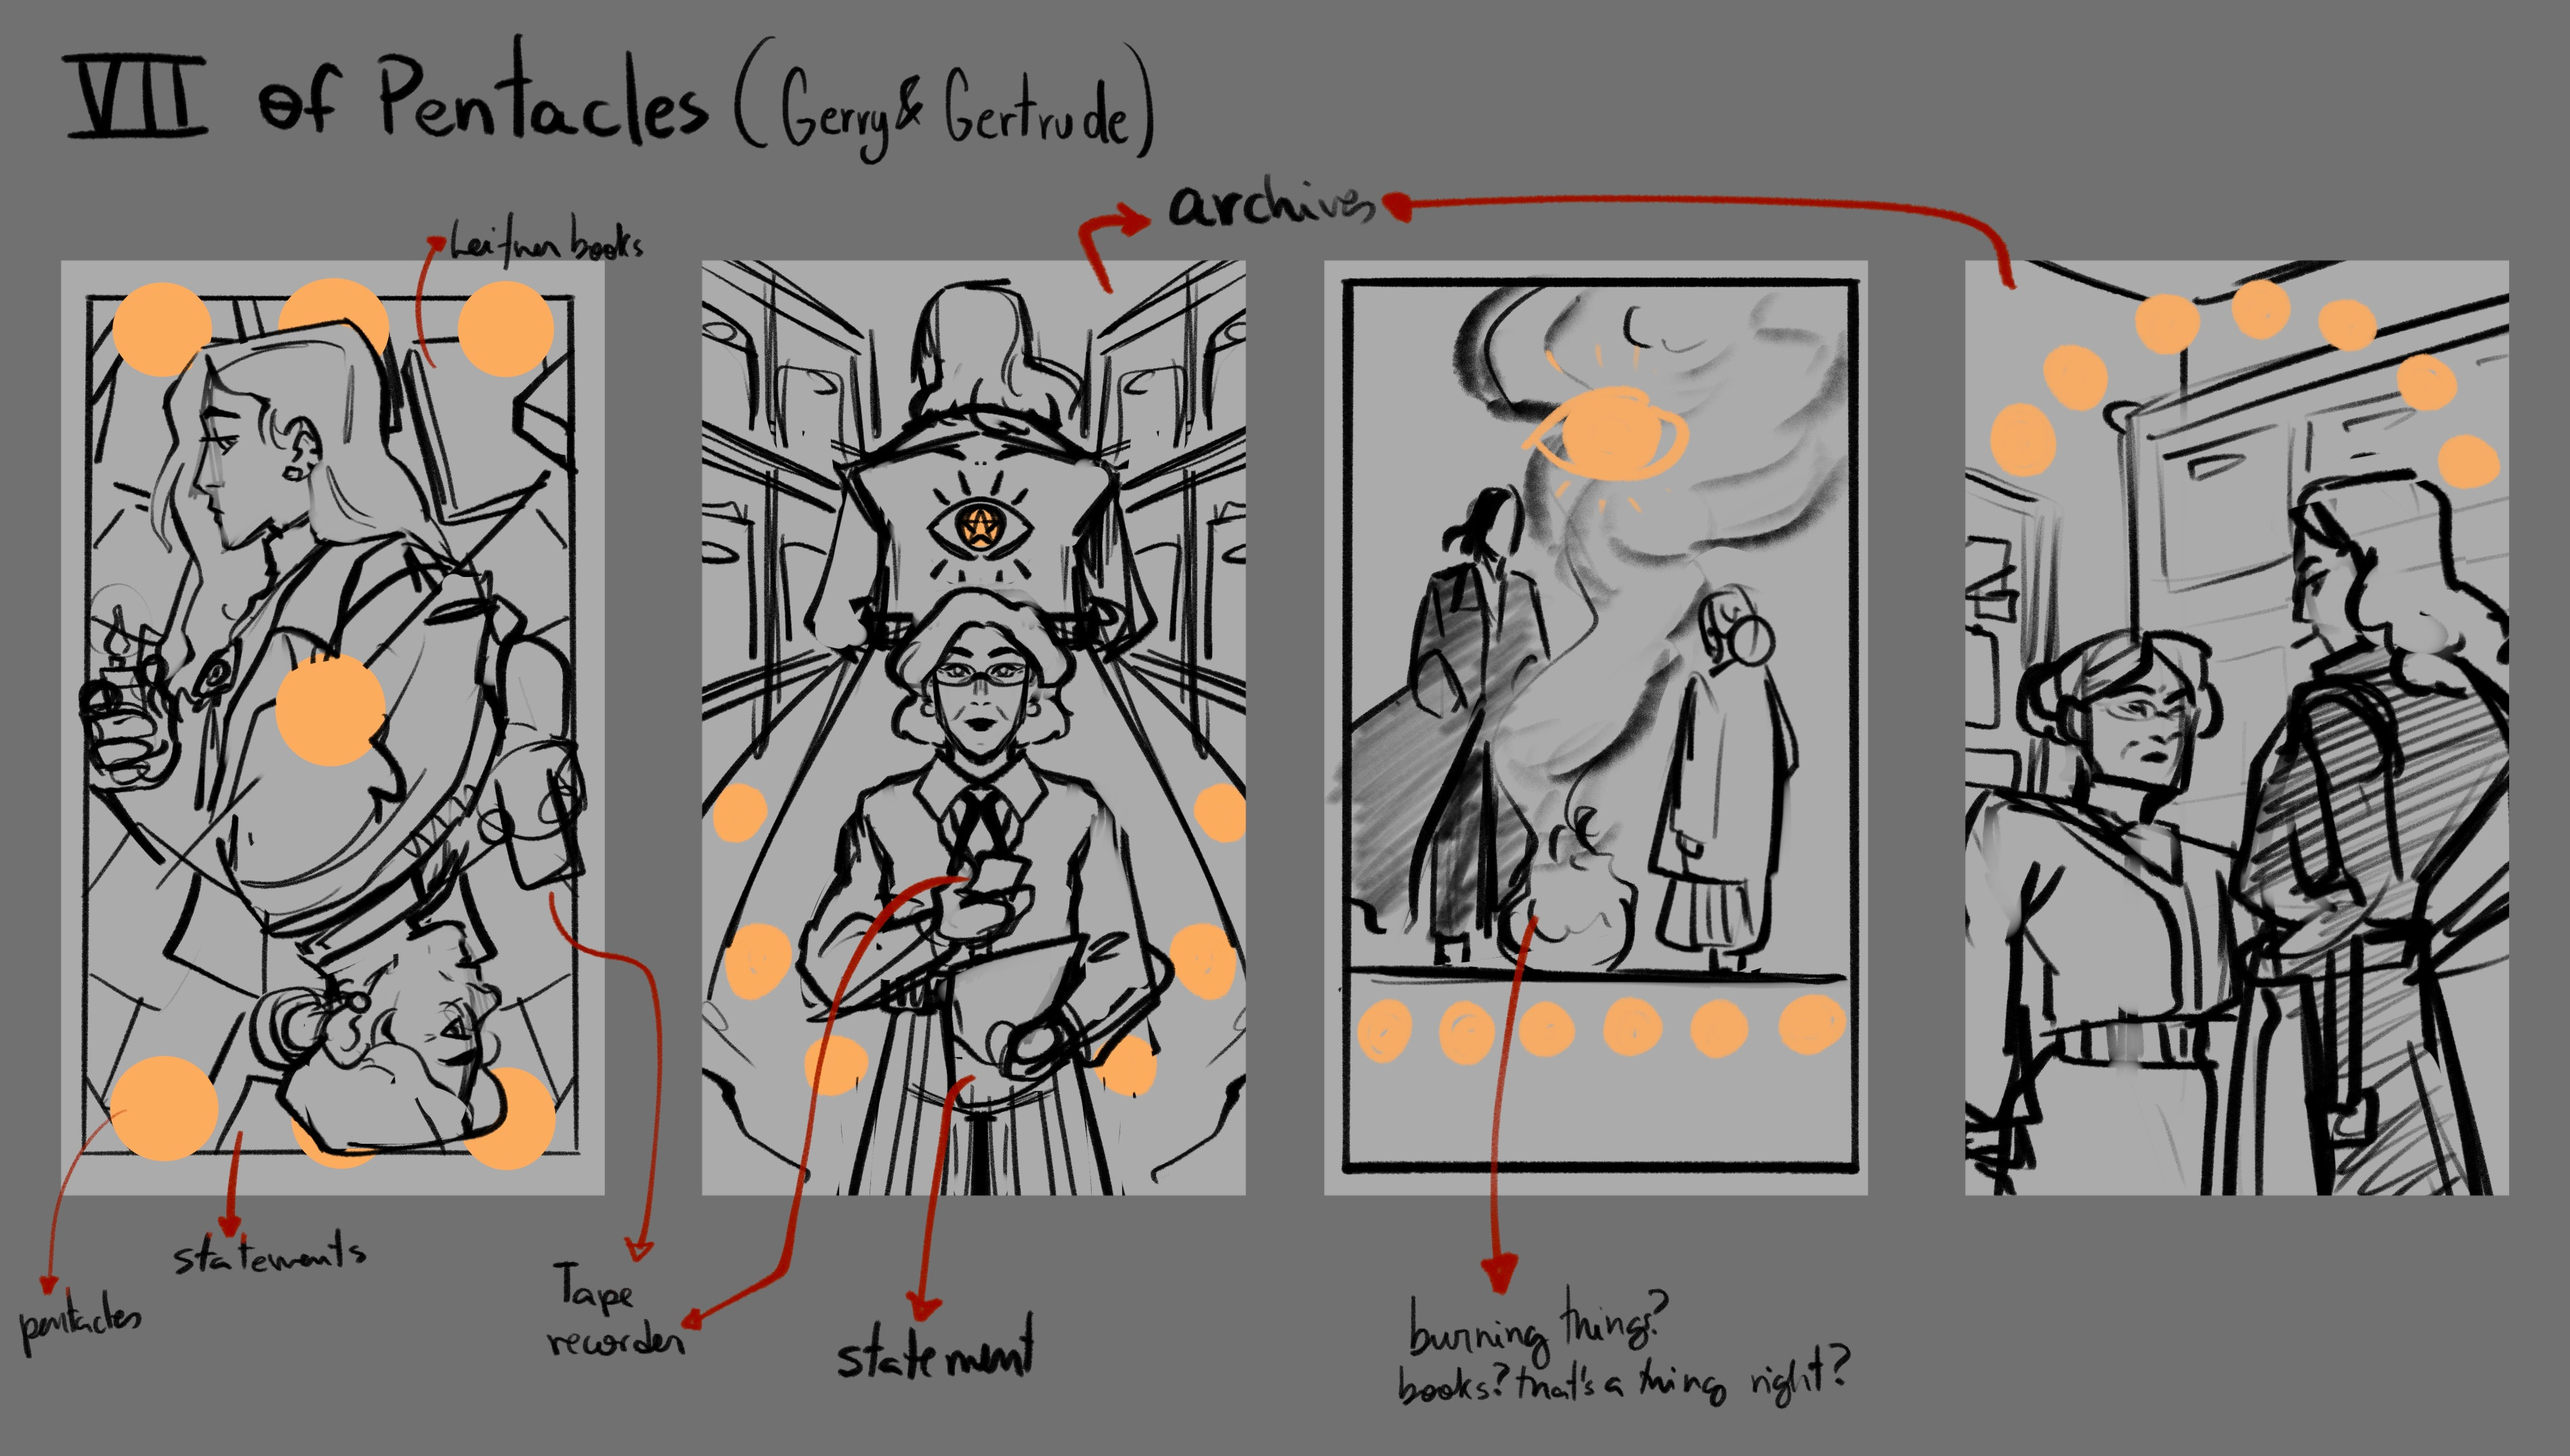 Differently from the other card, I had no idea of what to do with these character so I tried different approaches in each thumbnails (a specific scene or a more graphic look, etc.) My favorites were 1 and 3